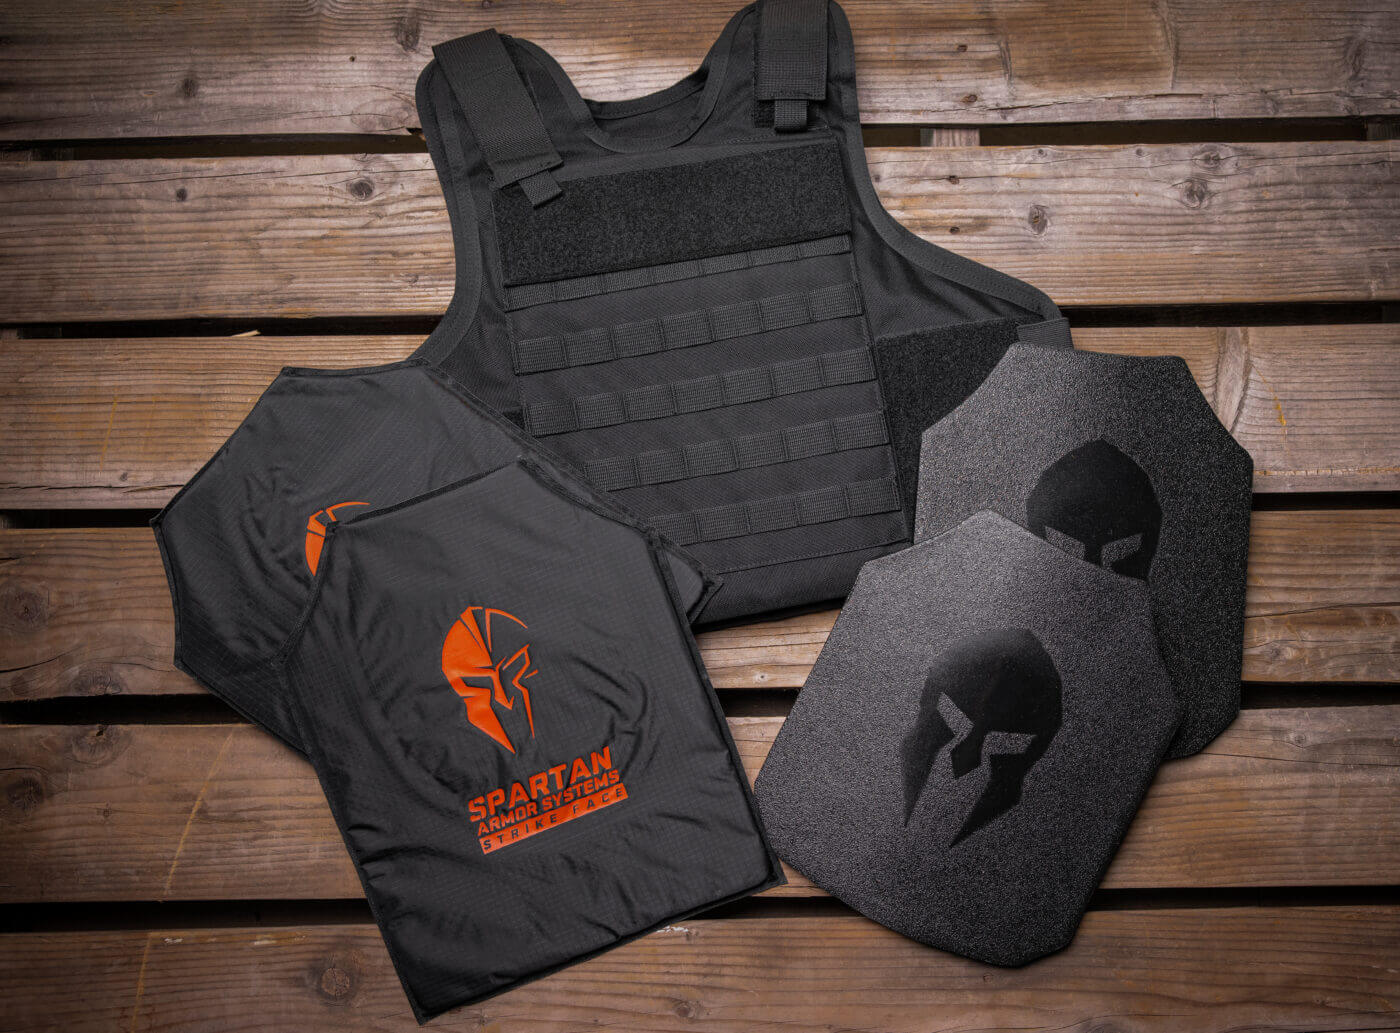 Body Armor Protection Levels Simplified - Spartan Armor Systems